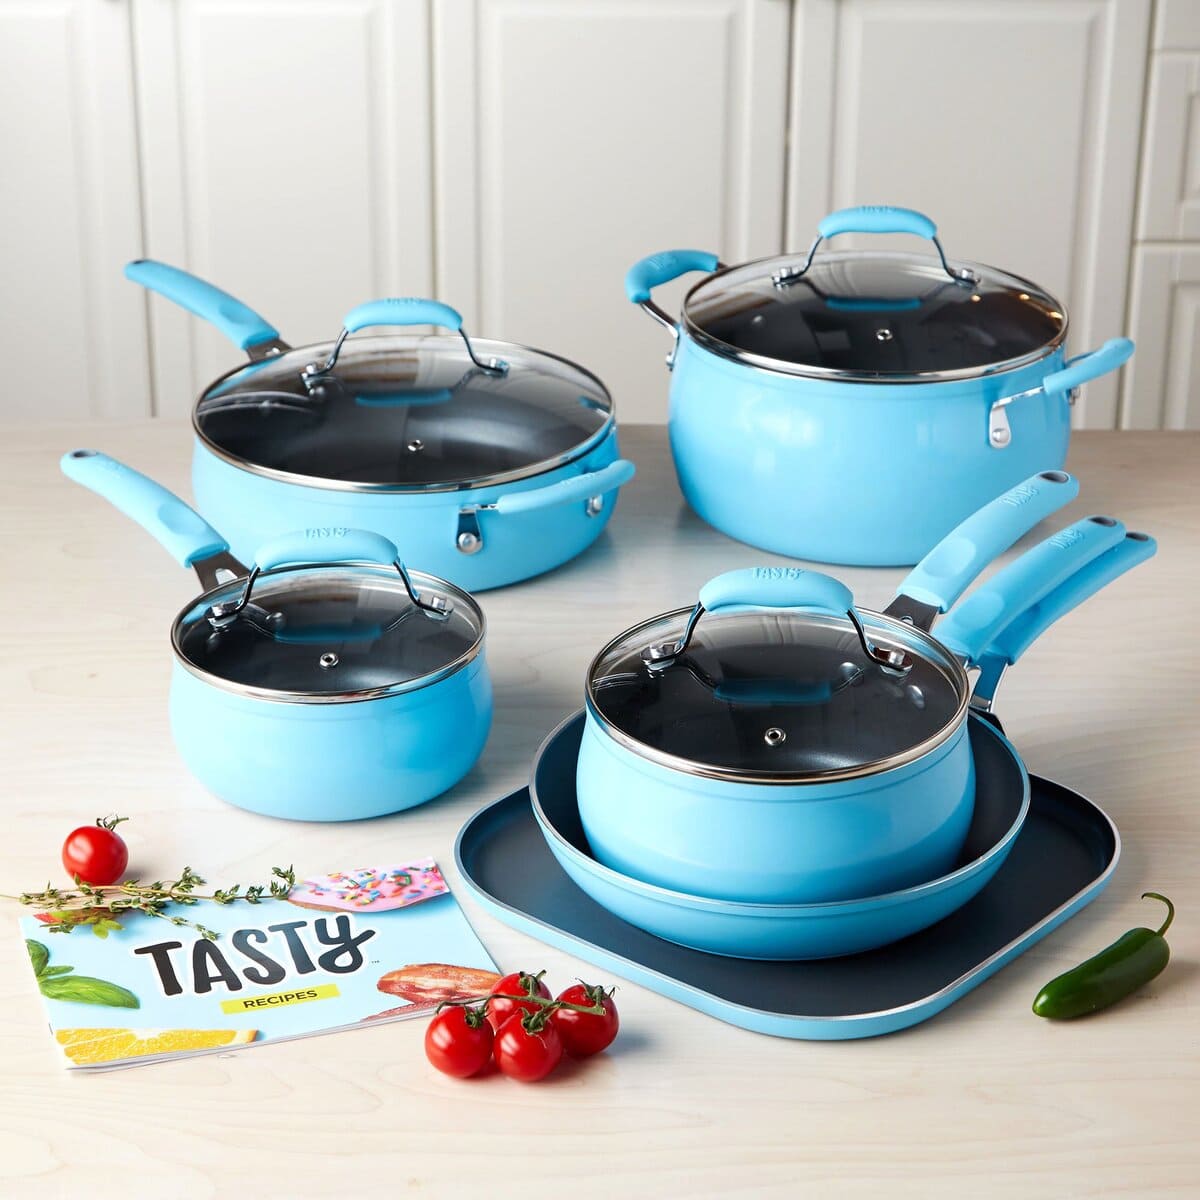 is tasty cookware ptfe and pfoa free